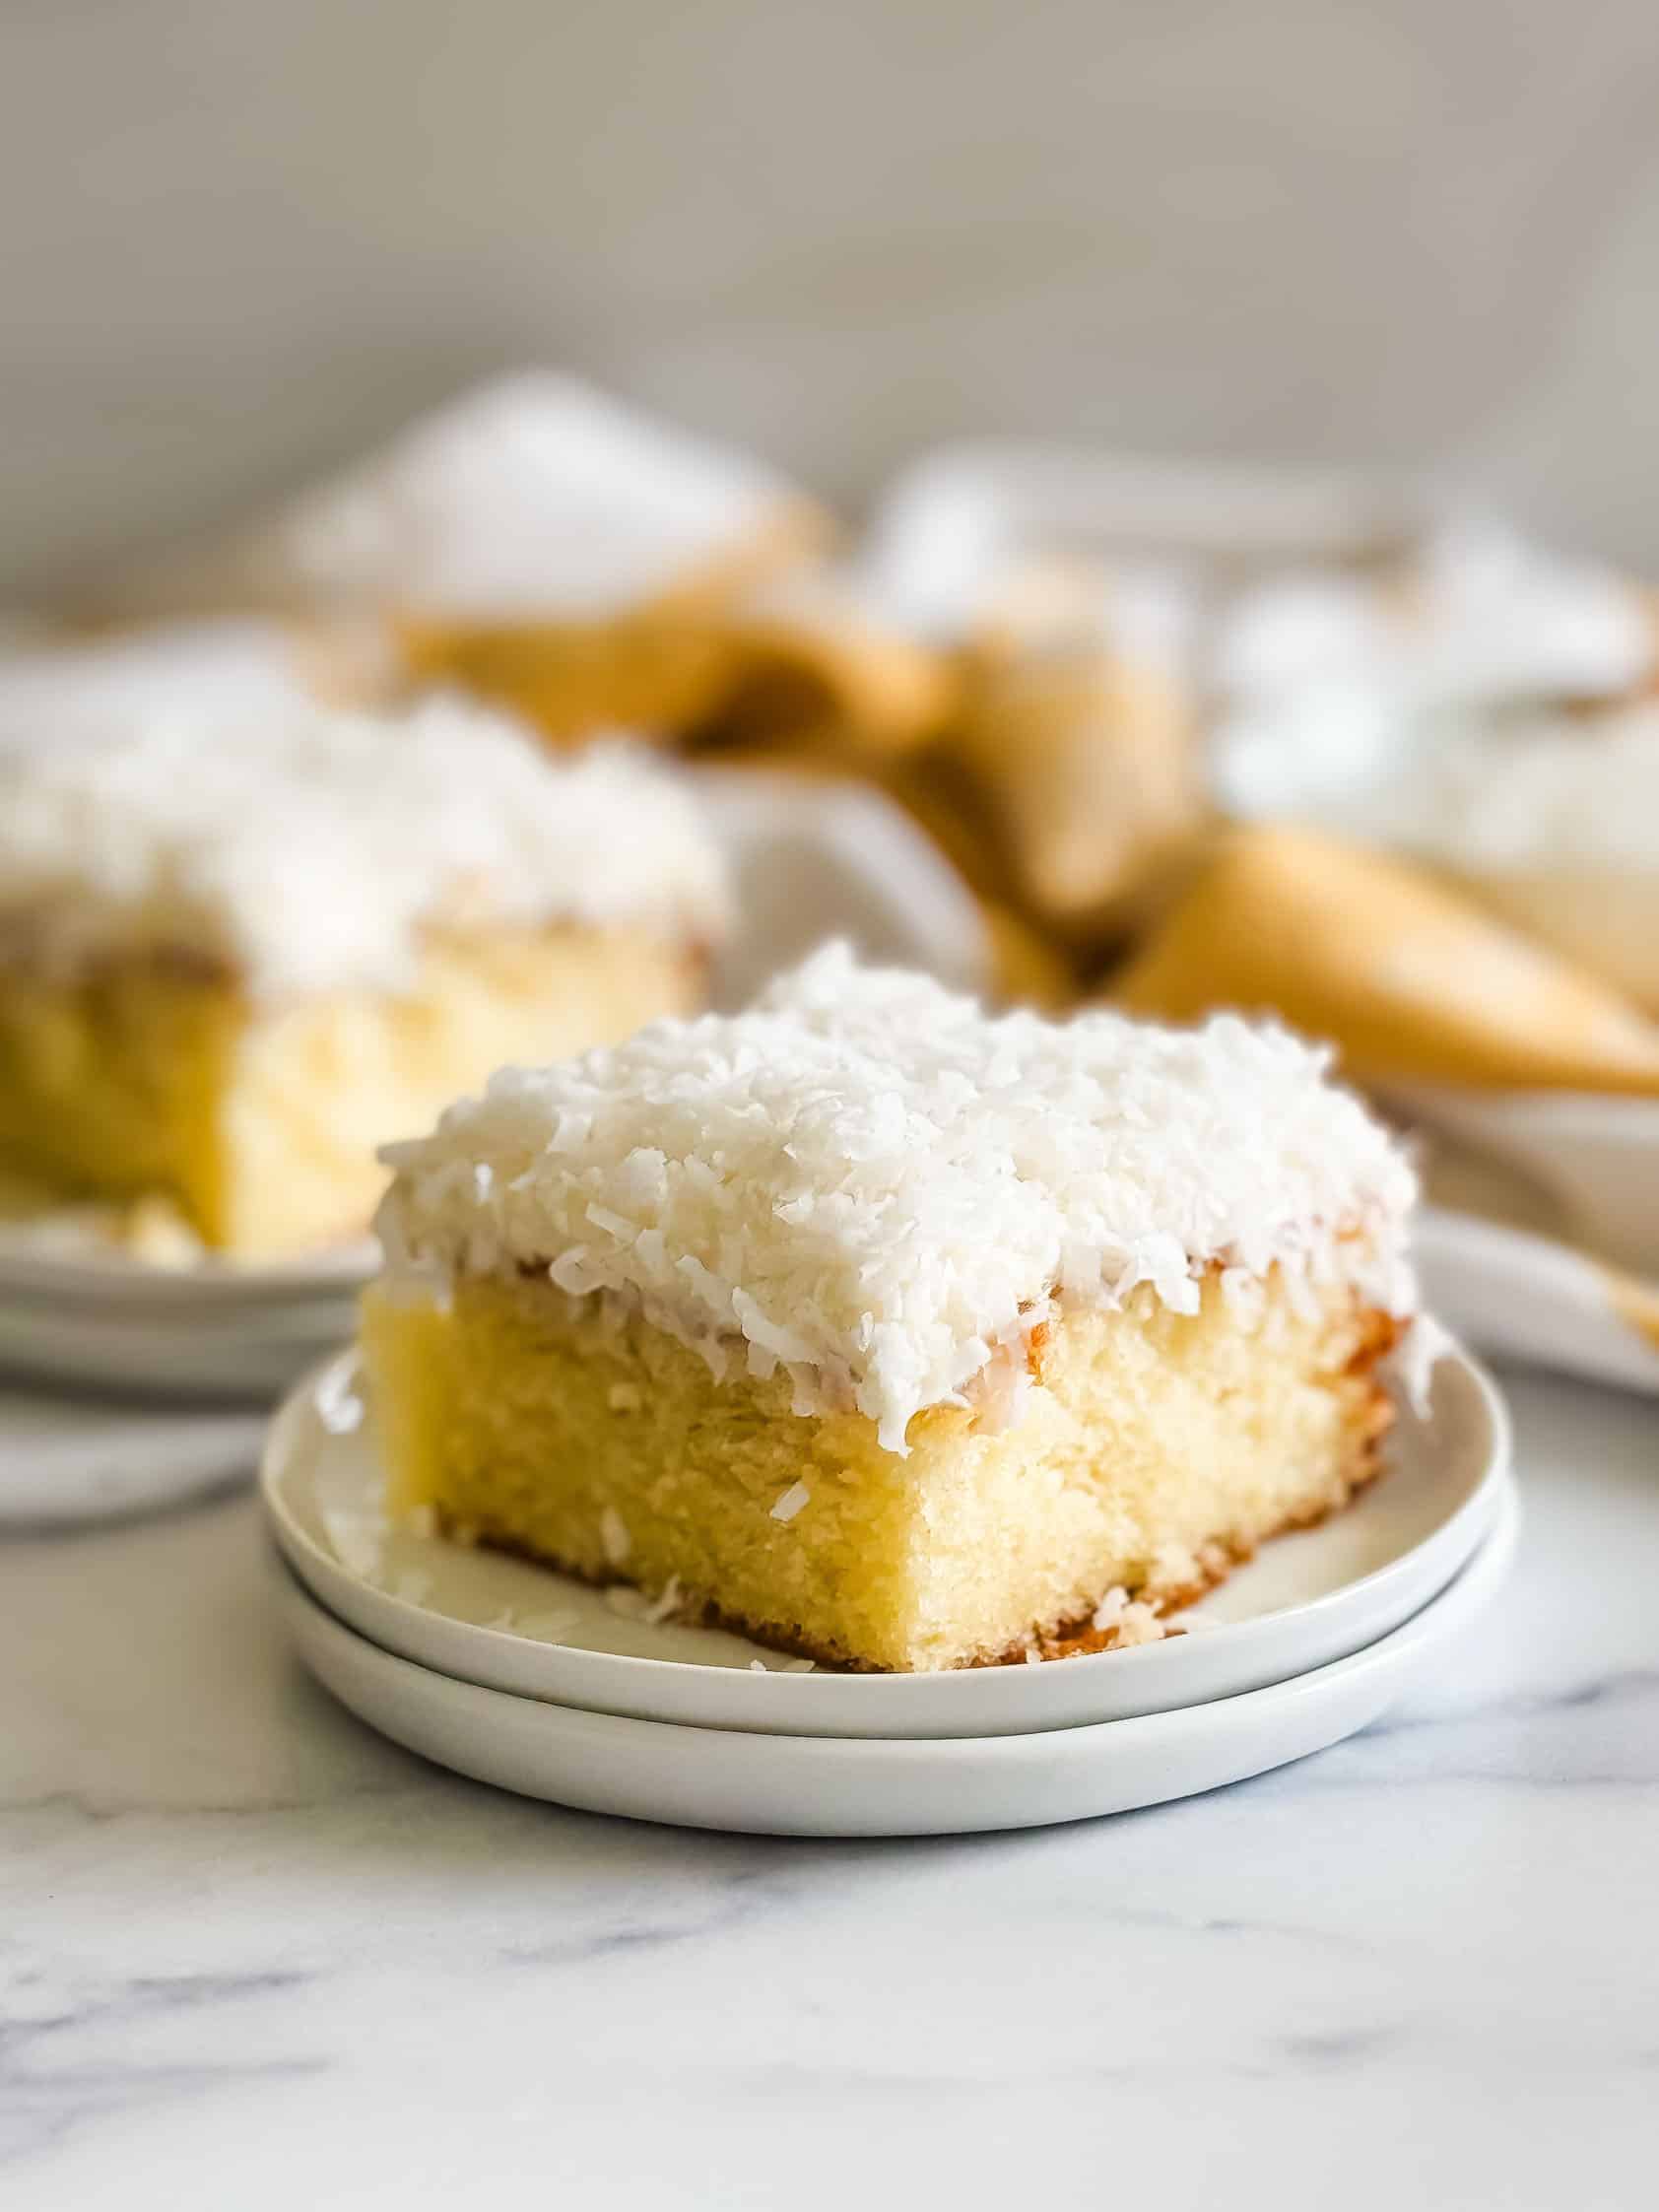 Slice of coconut cake on a white plate.